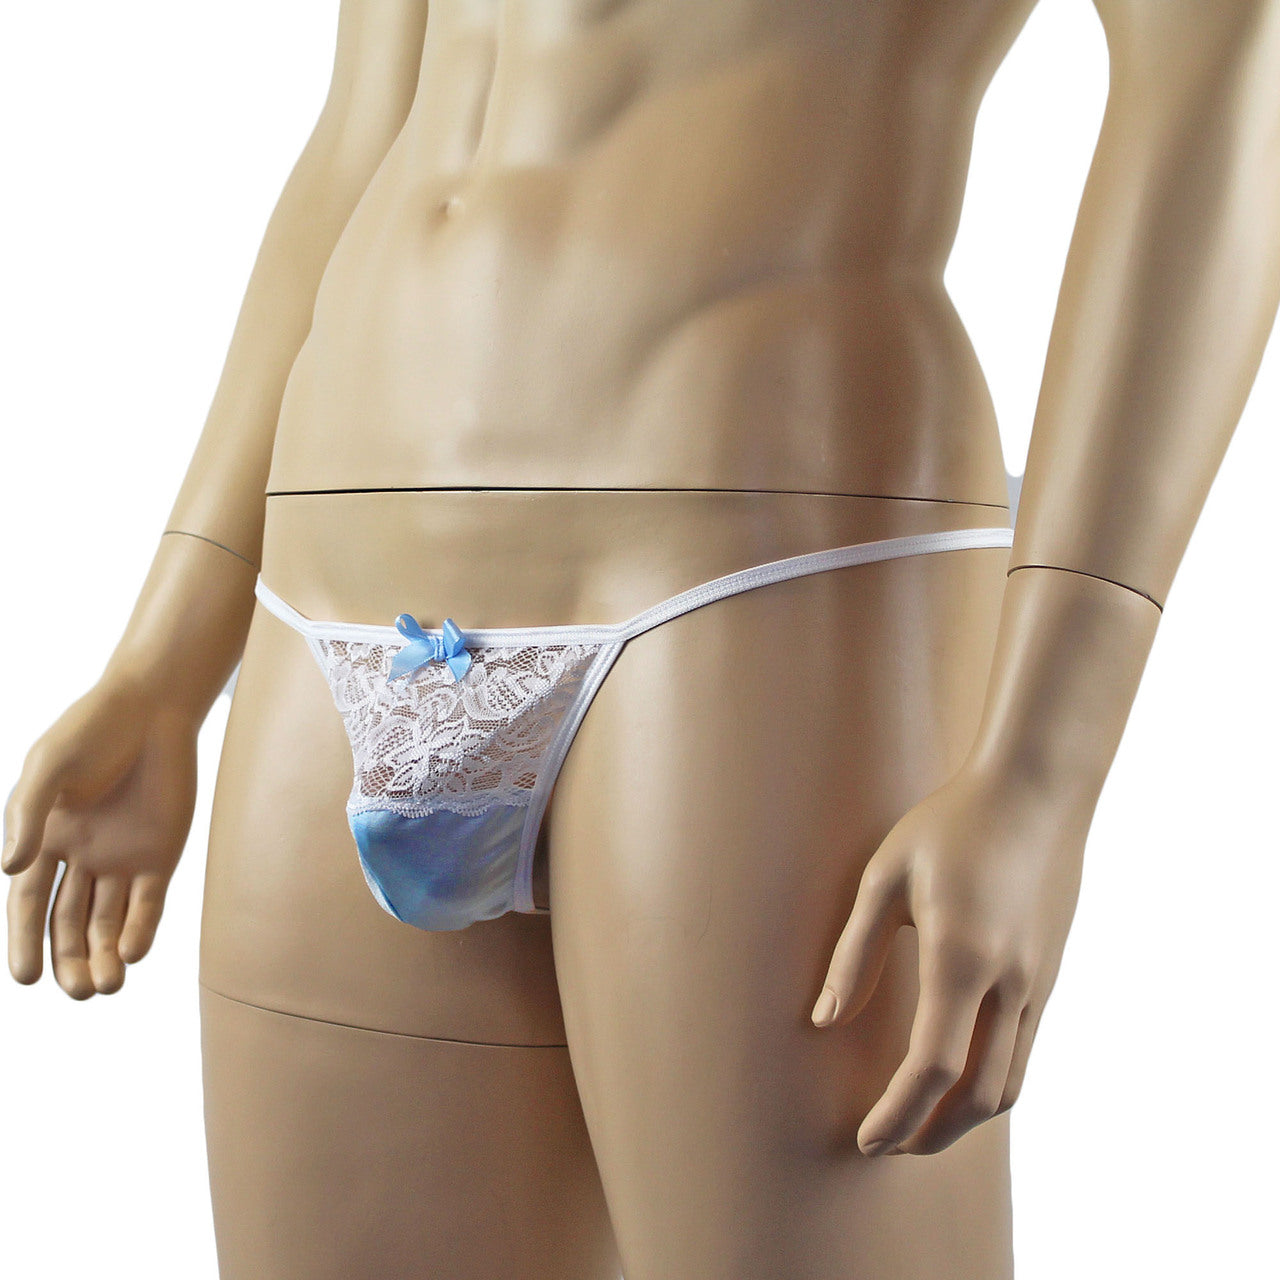 Mens Joanne Lacey G string with Bow Light Blue and White Lace